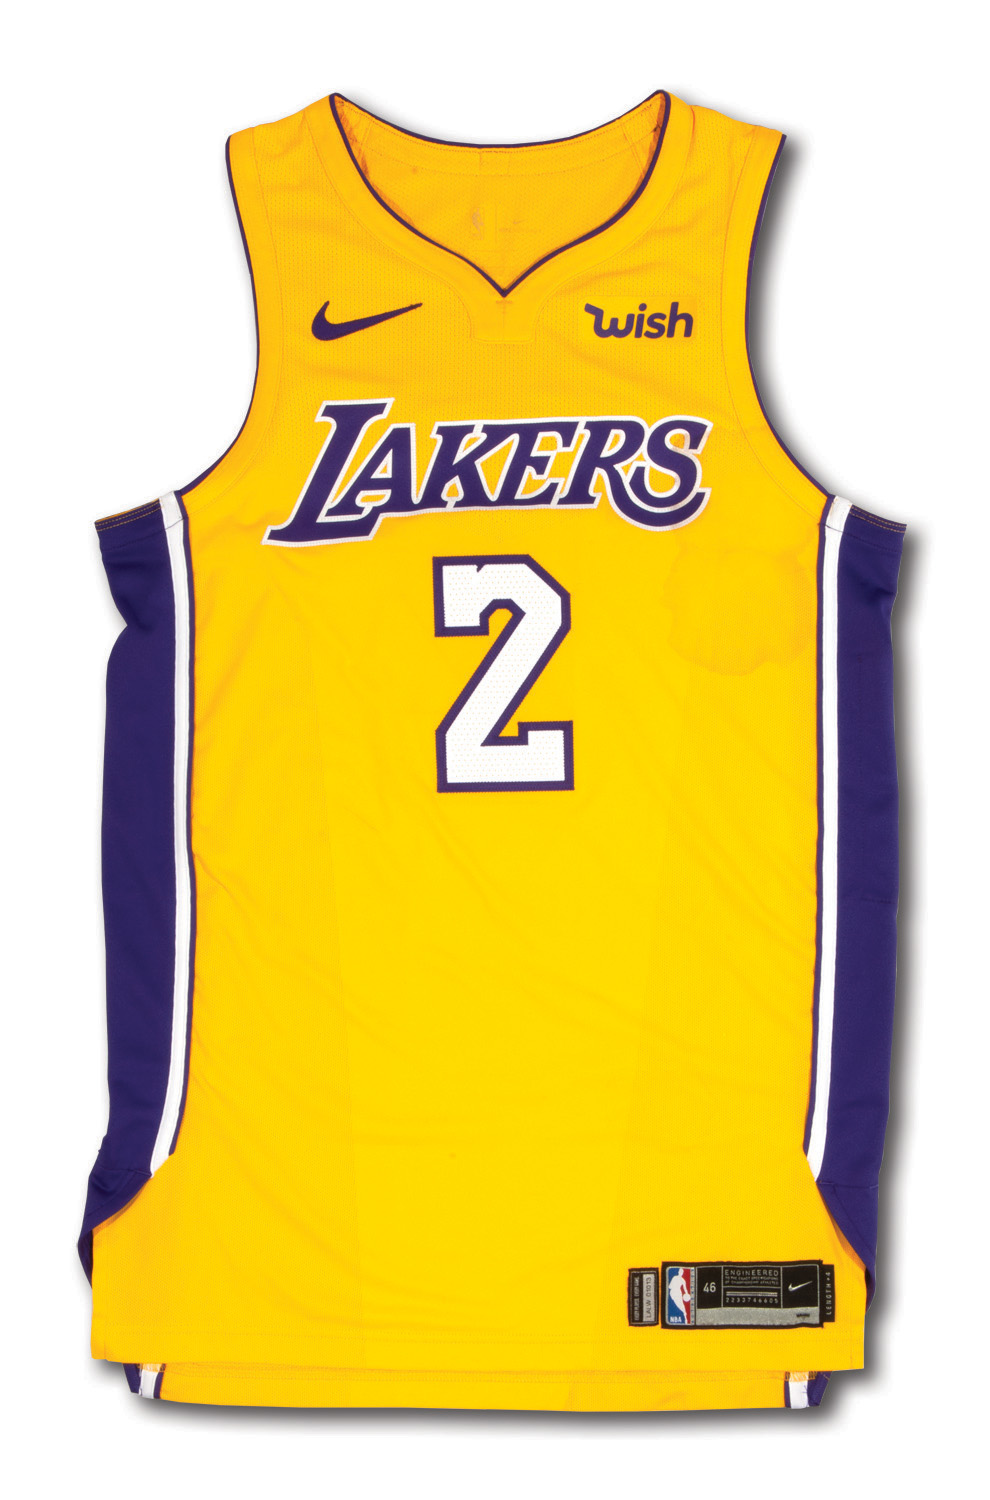 lakers jersey 2017